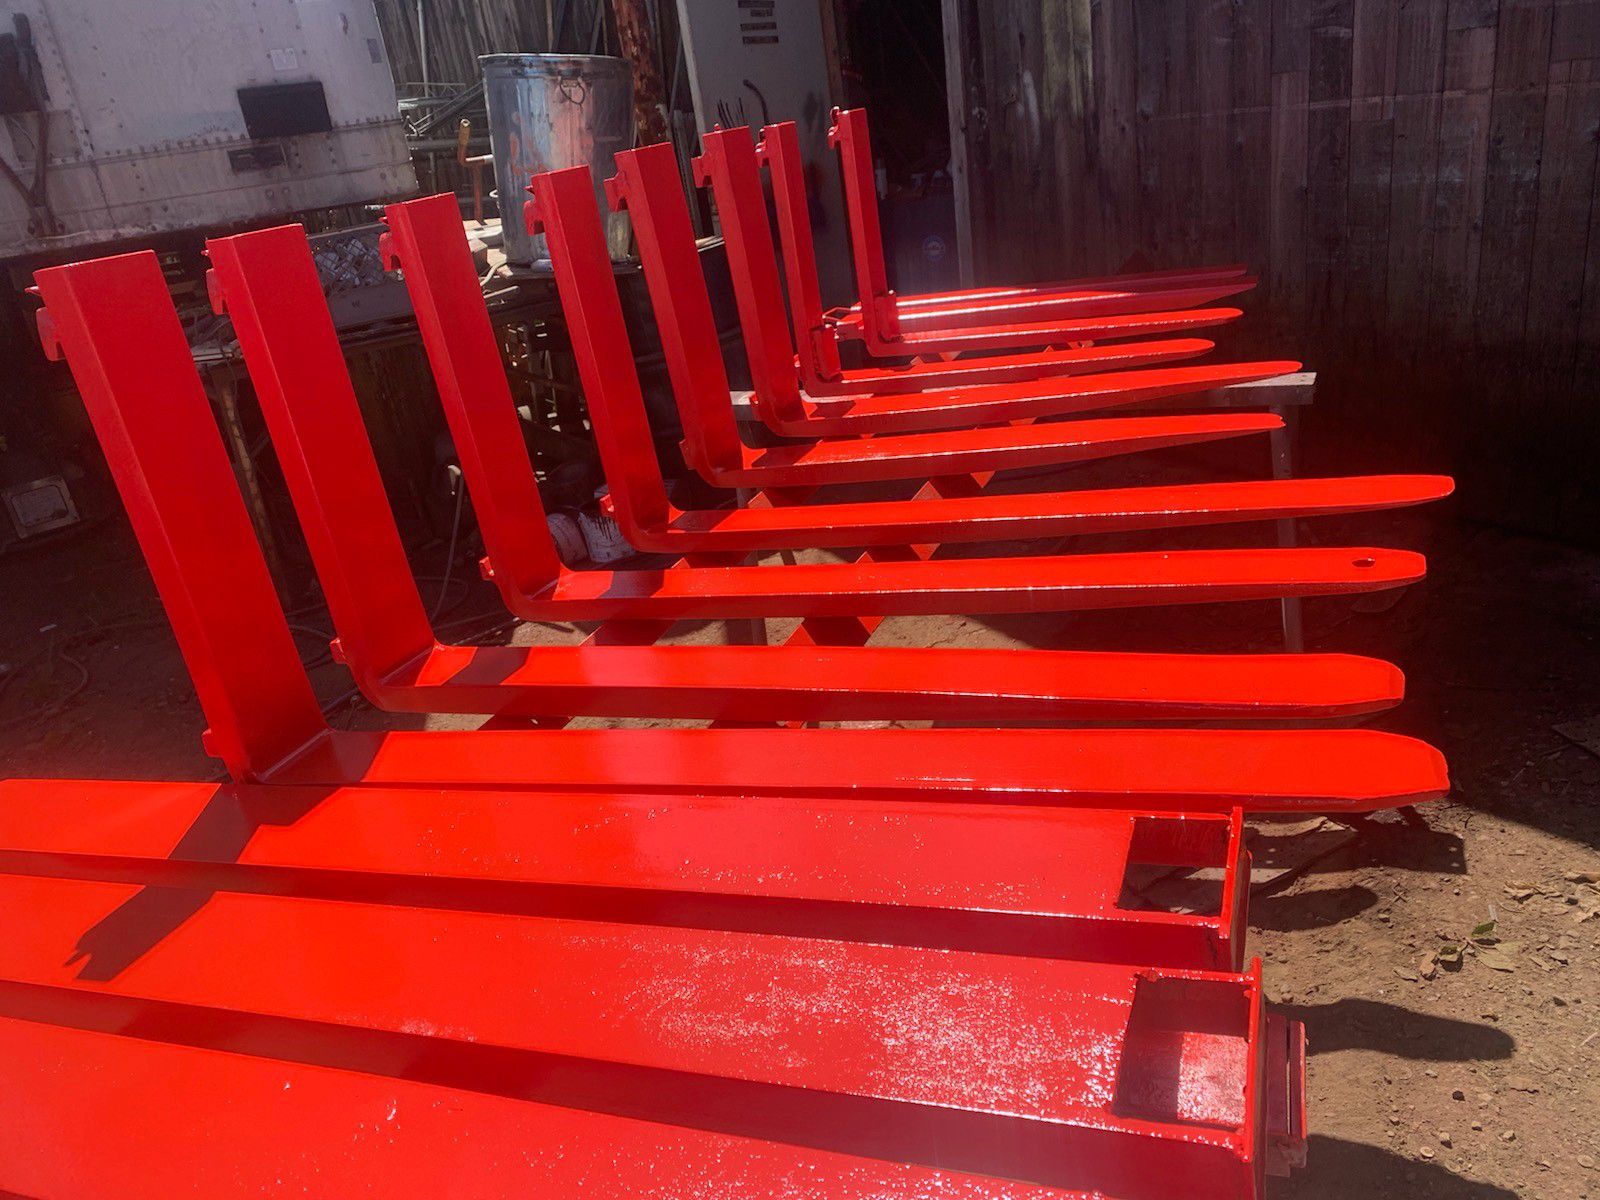 Used sets of fork extenders